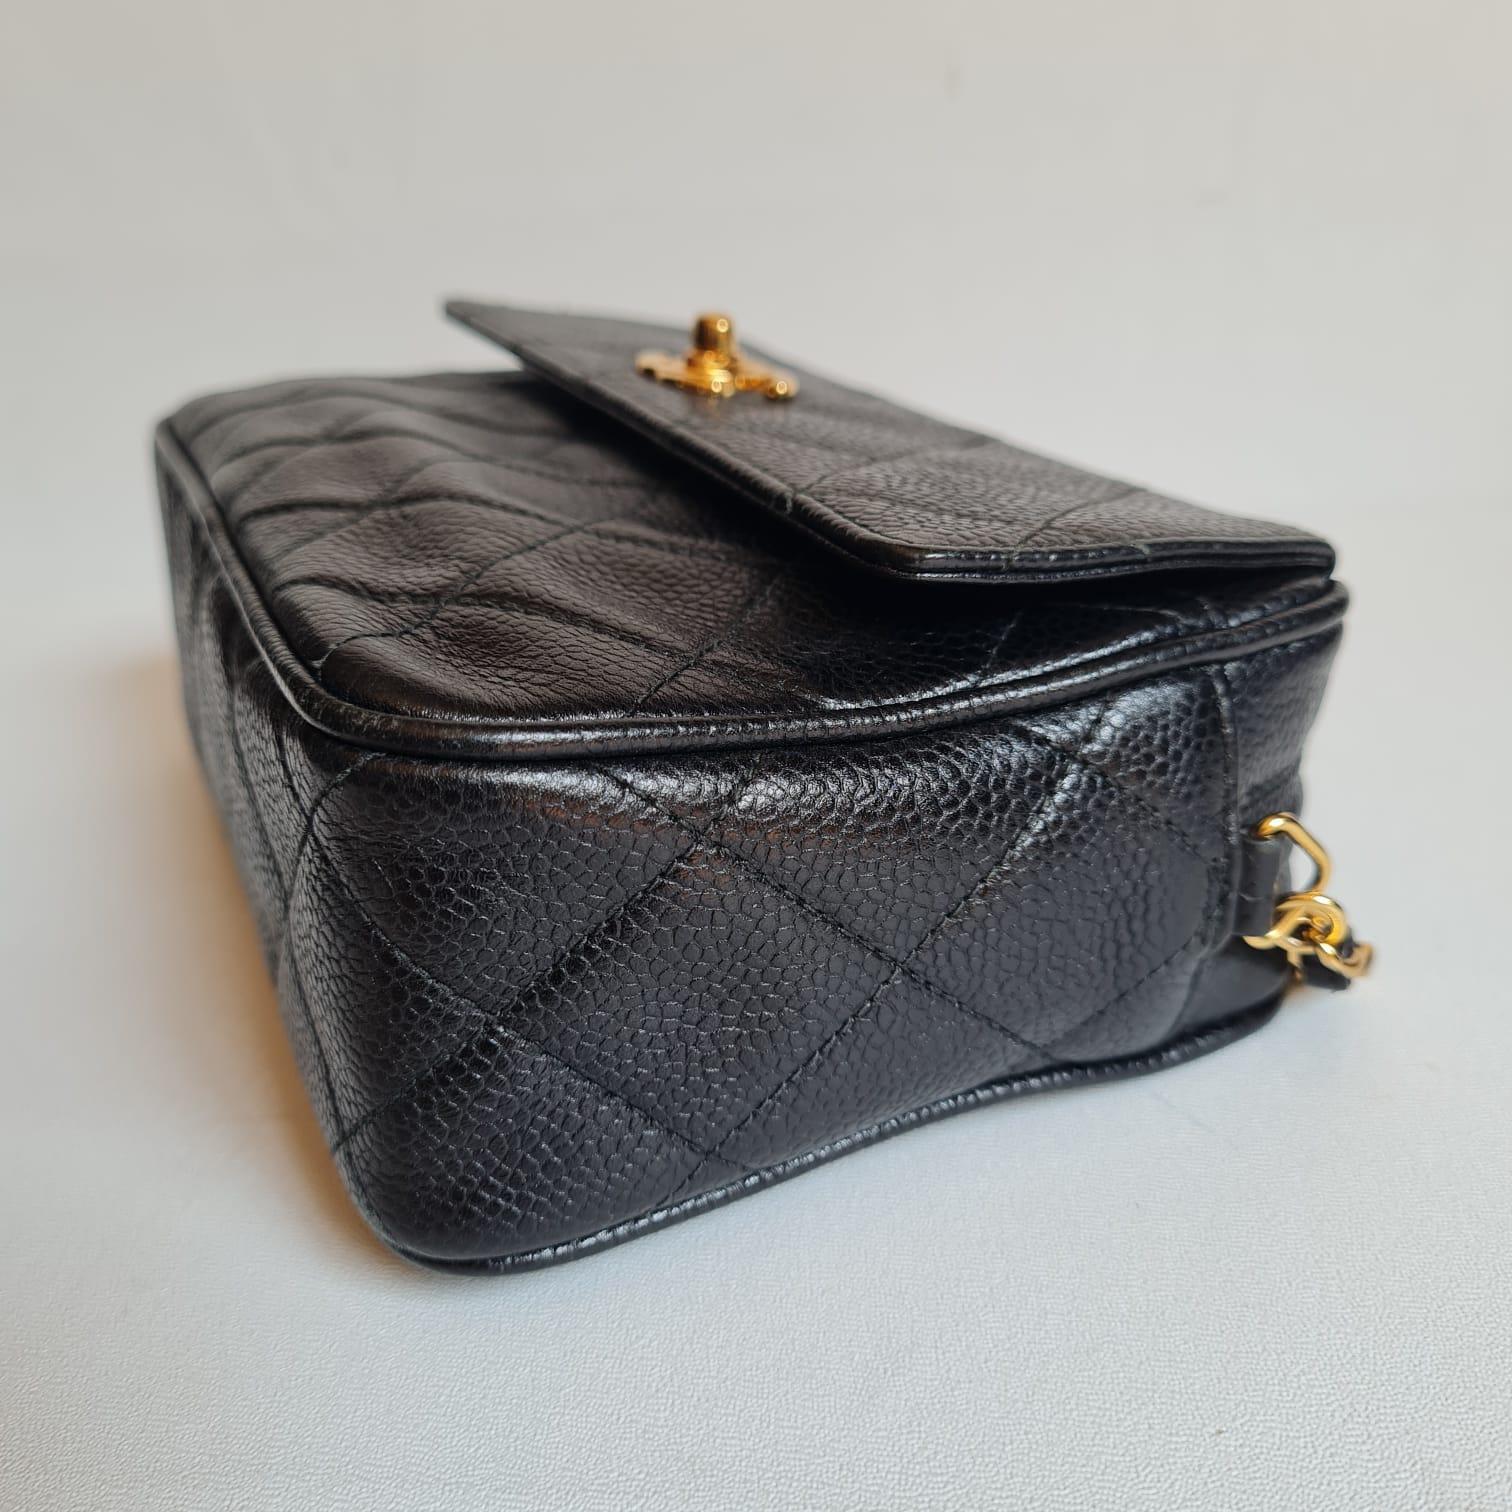 Rare mini camera bag from the 90s. Still in very good condition, with faint marks on the zip hardware and some scuffs on the lining. Item #3. Comes with its card